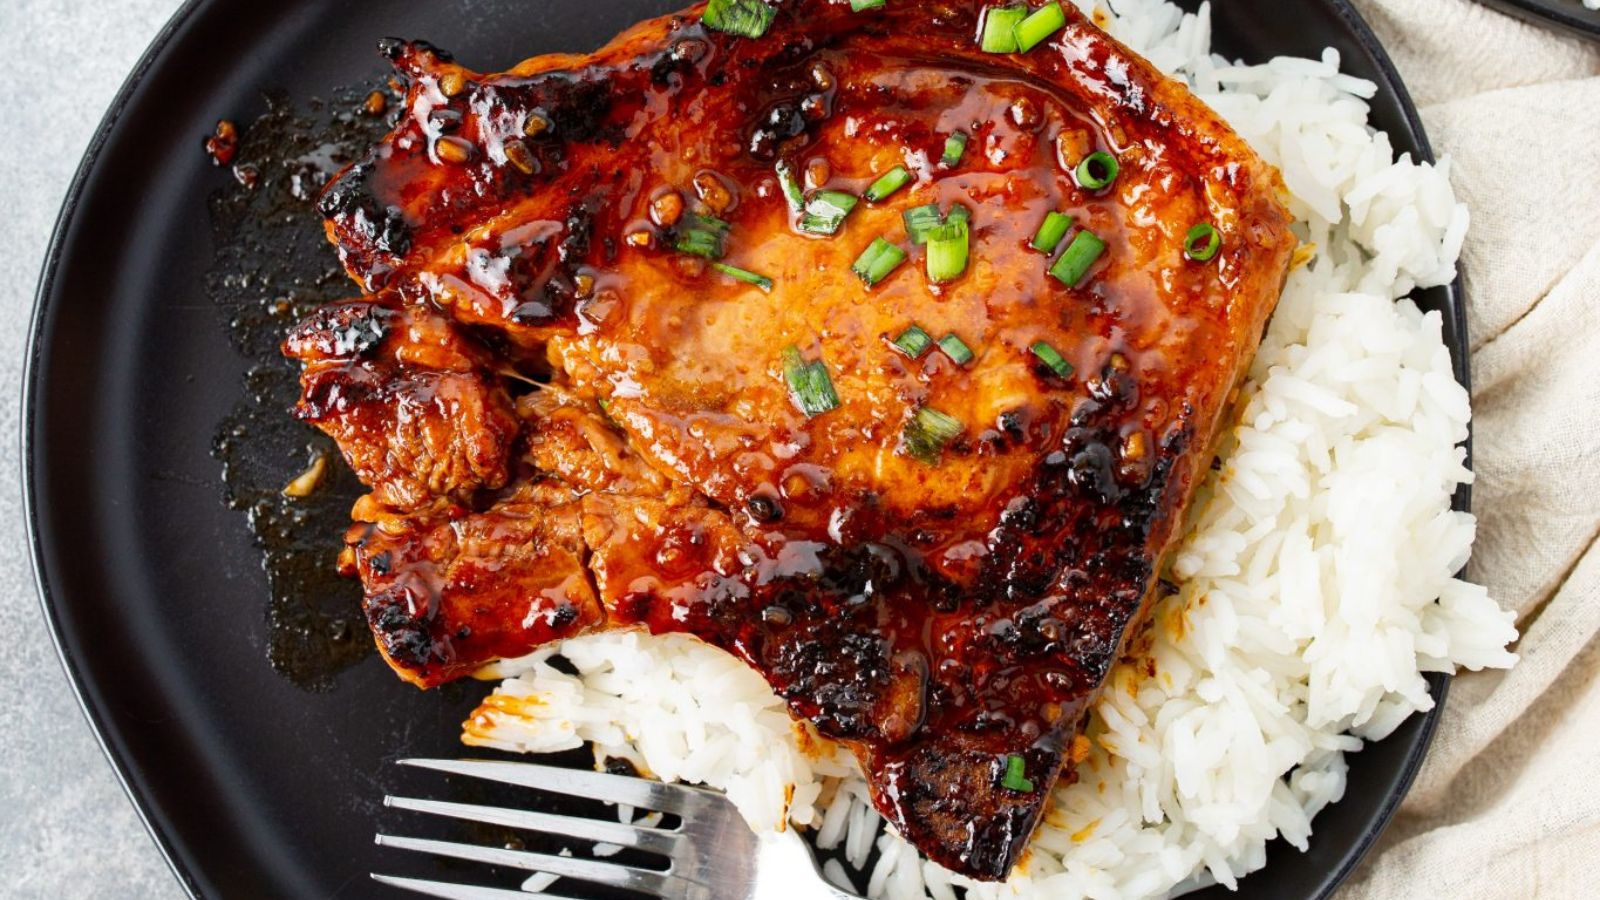 <p>Pork chops make for a quick and easy dinner every time; these Asian-inspired hoisin Glazed Pork Chops are no exception. Loaded with sweet, tangy flavor, it’s the perfect stovetop dinner recipe served simply alongside rice that both kids and adults will love.</p><p><strong>Recipe:</strong> <strong><a href="https://castironrecipes.com/asian-style-hoisin-glazed-pork-chops-with-video/">asian pork chops</a></strong></p>